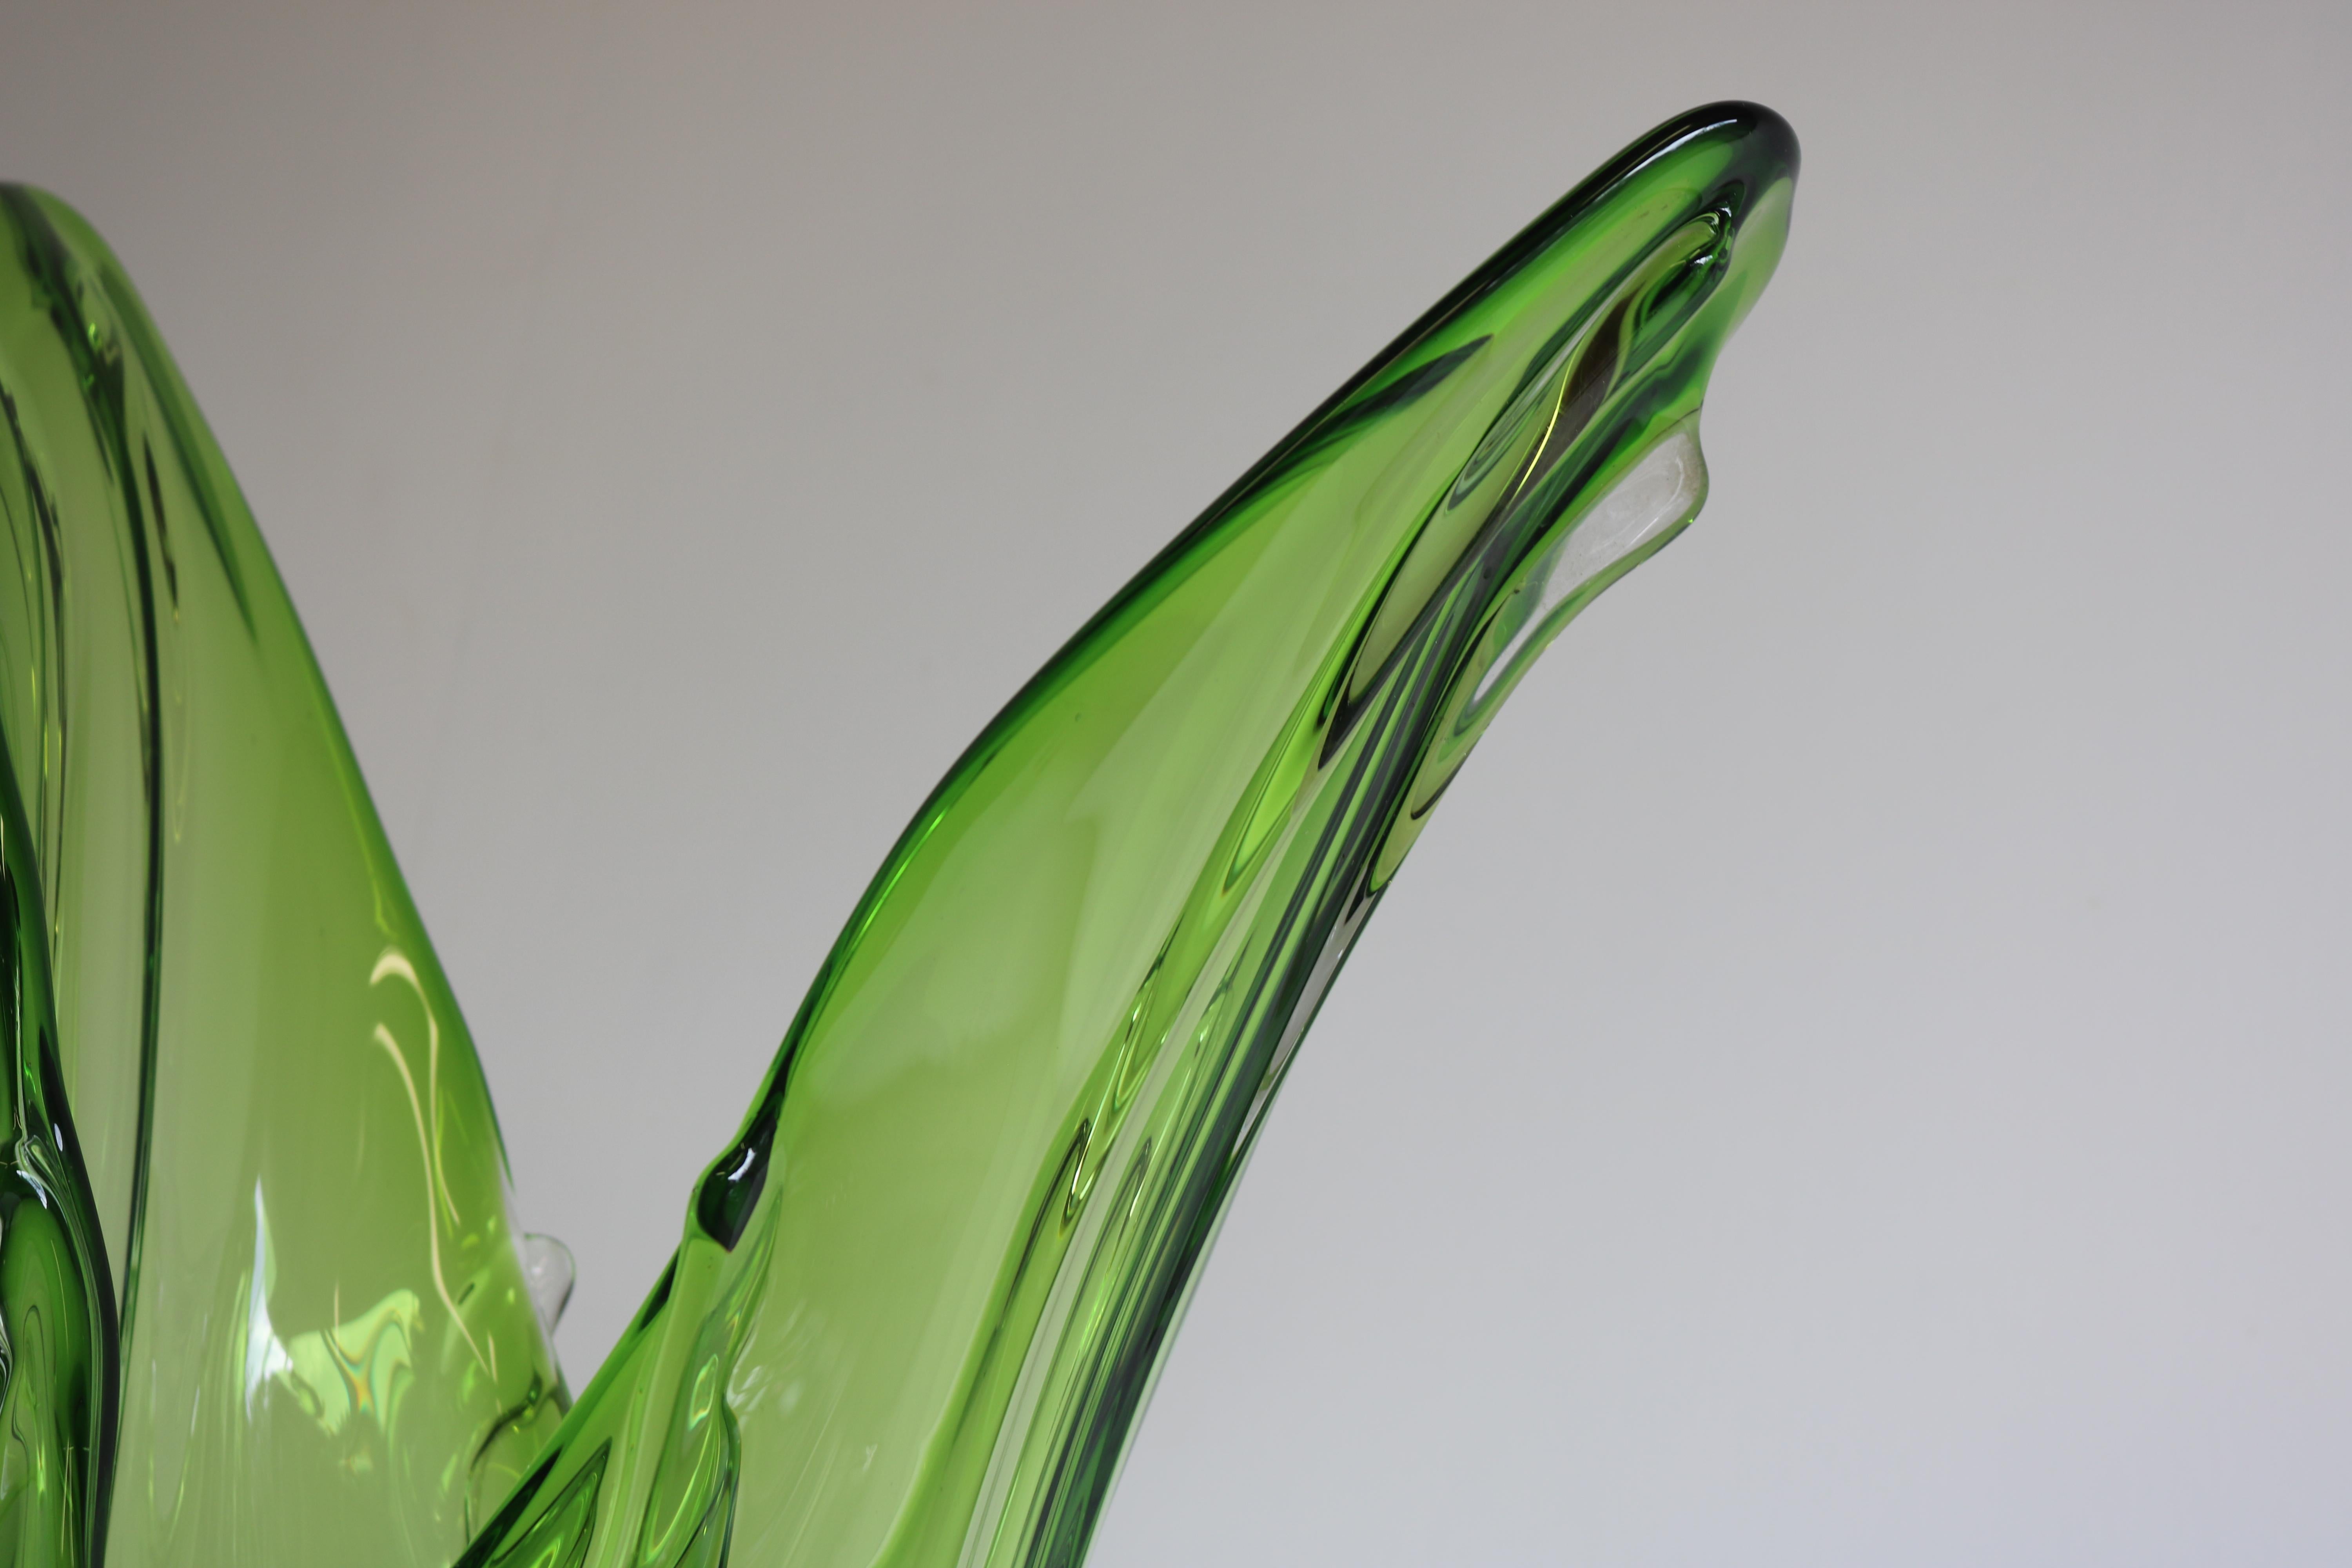 Large 5.4kg Italian Murano Glass vase Attr. Fratelli Toso 1950 Green Sommerso  For Sale 1